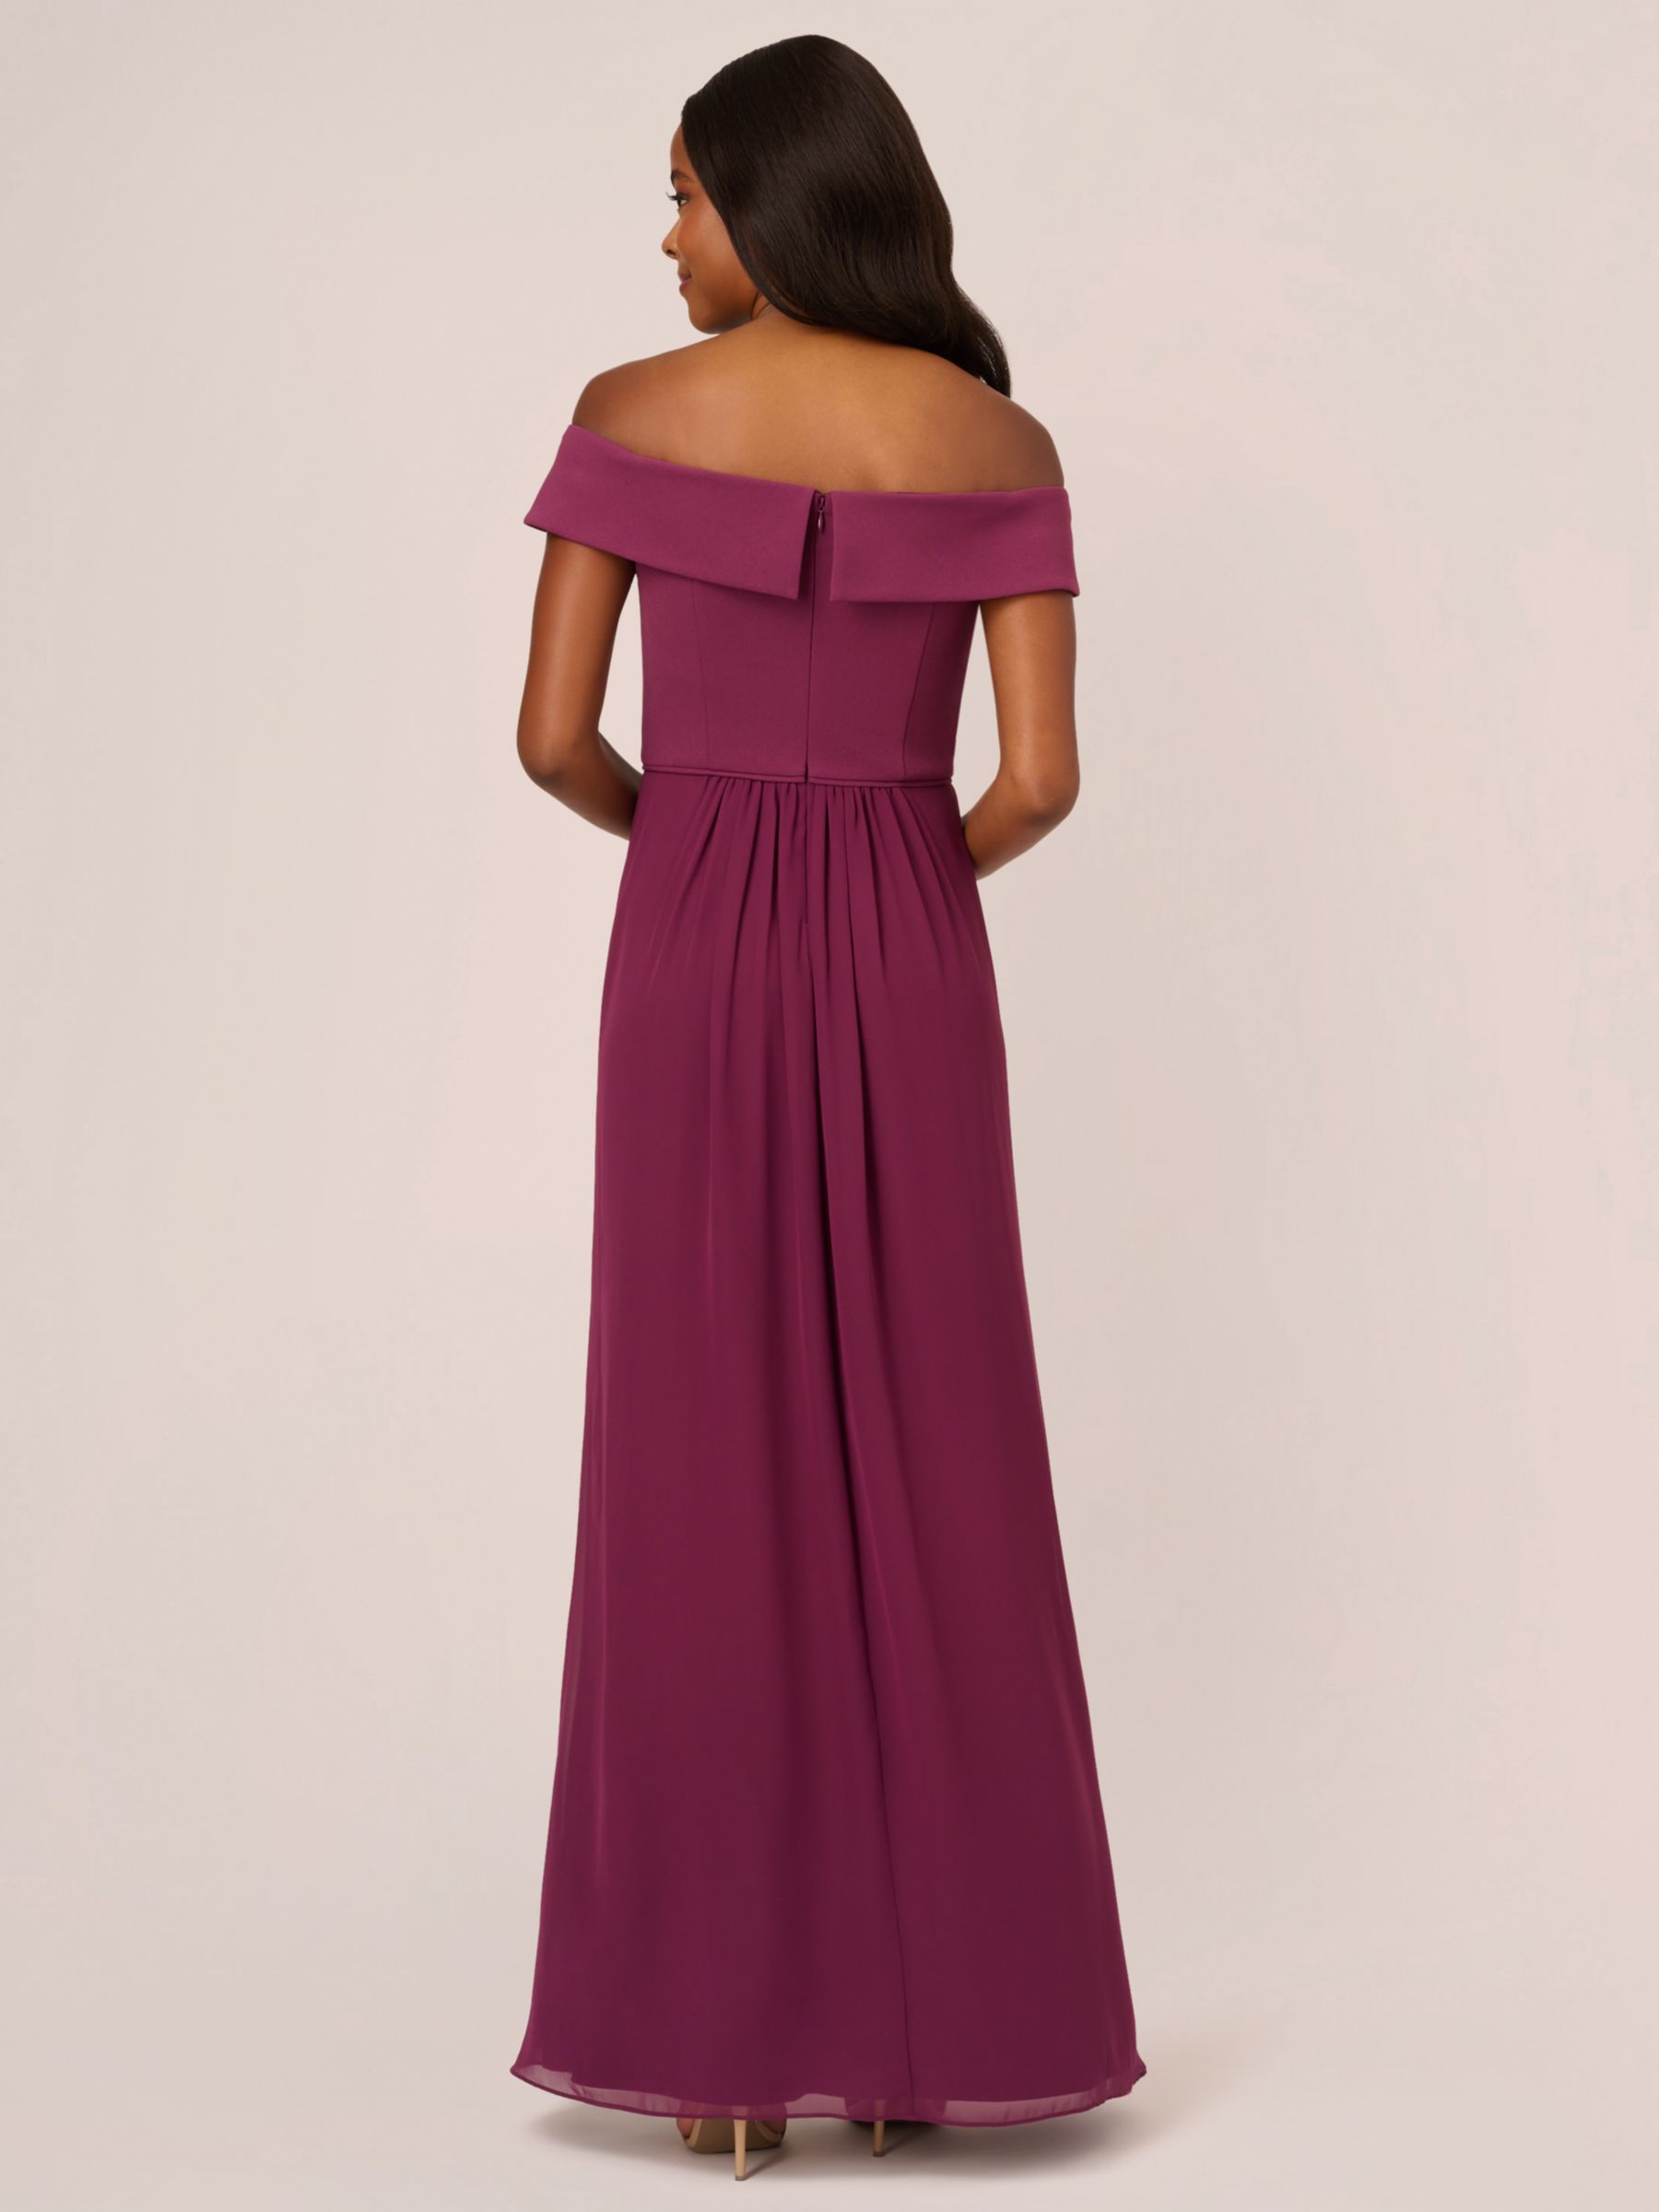 Buy Adrianna Papell Off Shoulder Crepe Chiffon Maxi Dress, Cassis Online at johnlewis.com